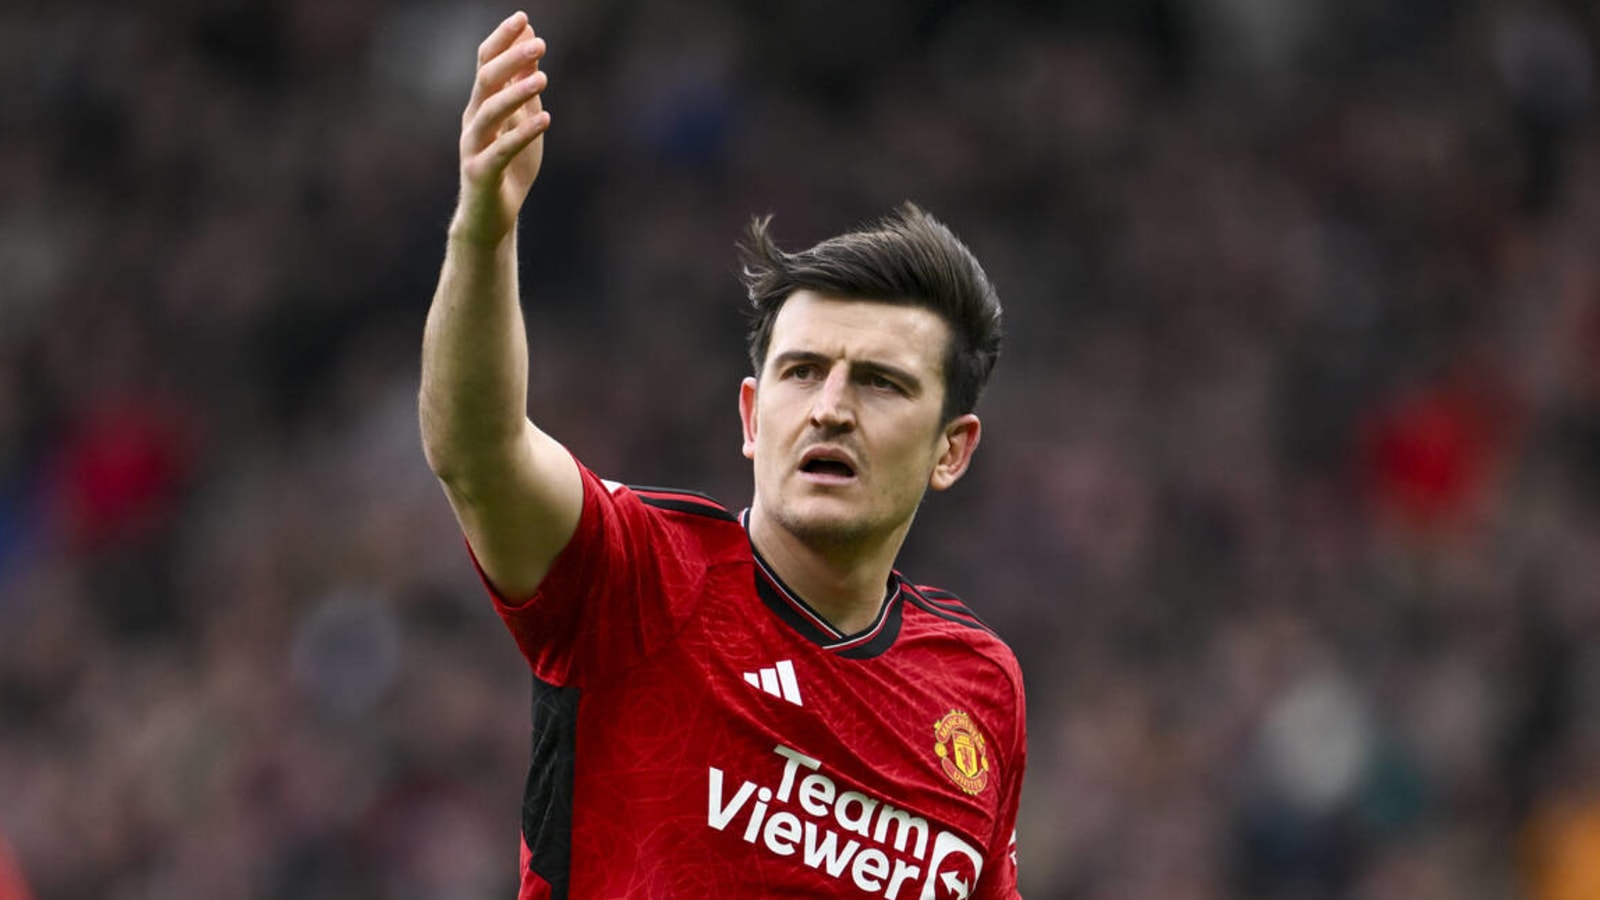 ‘Very good defender’ – Ten Hag backs Maguire to lead depleted Manchester United defence